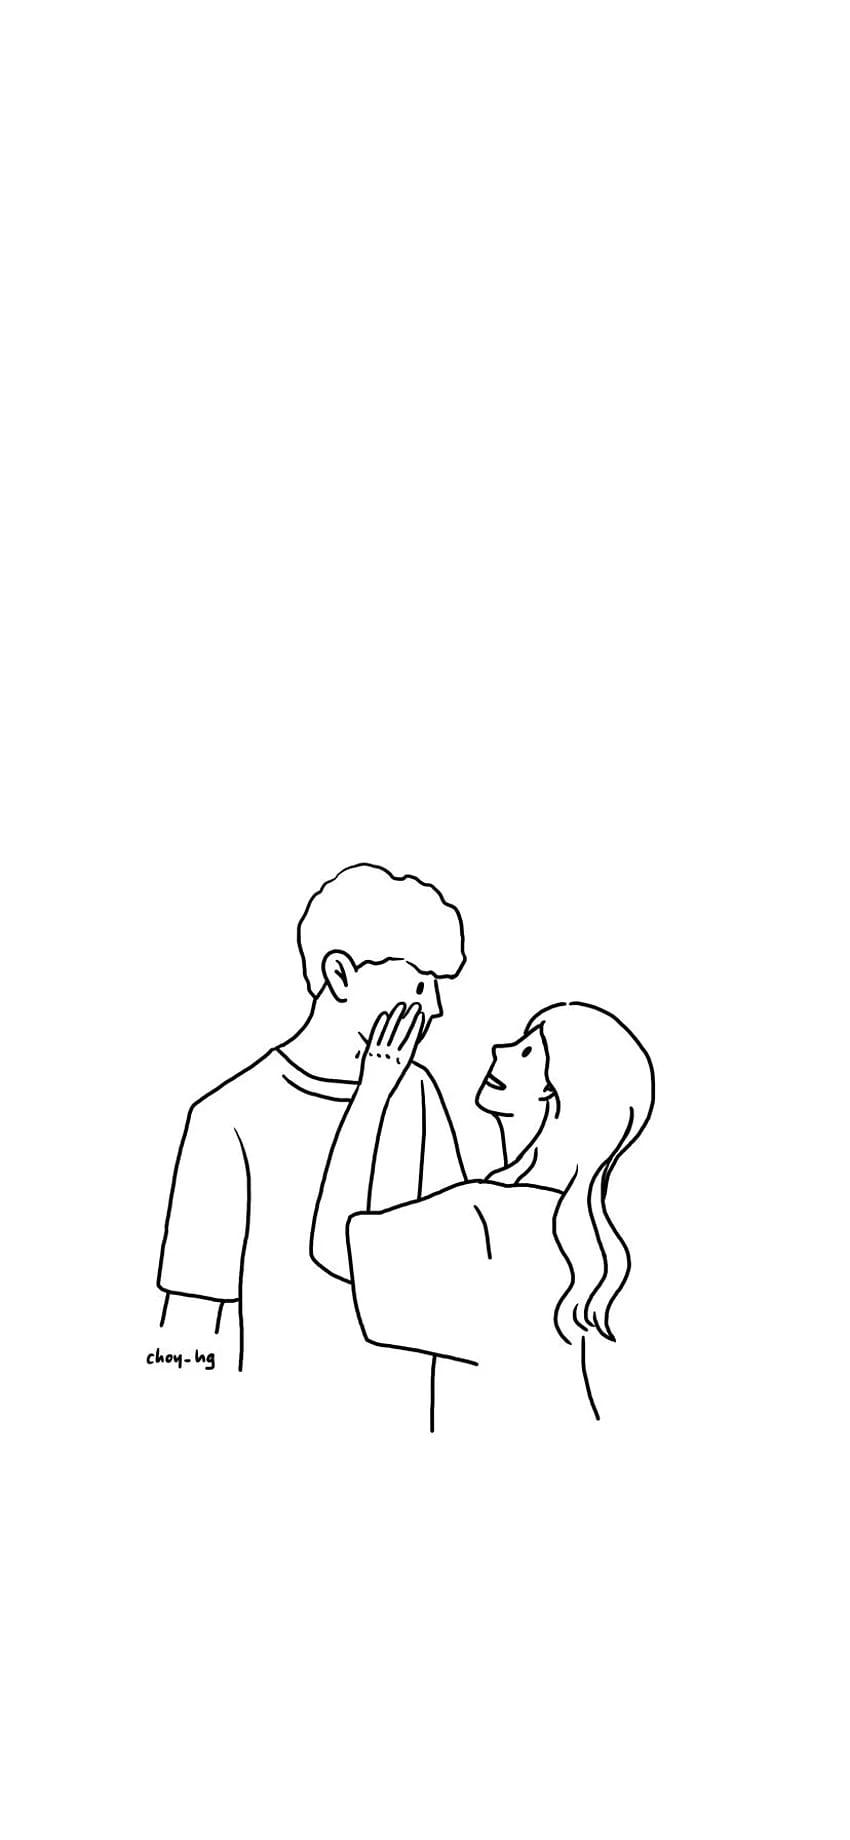 Download Cute Couple Drawing For Iphone Display Wallpaper | Wallpapers.com-saigonsouth.com.vn